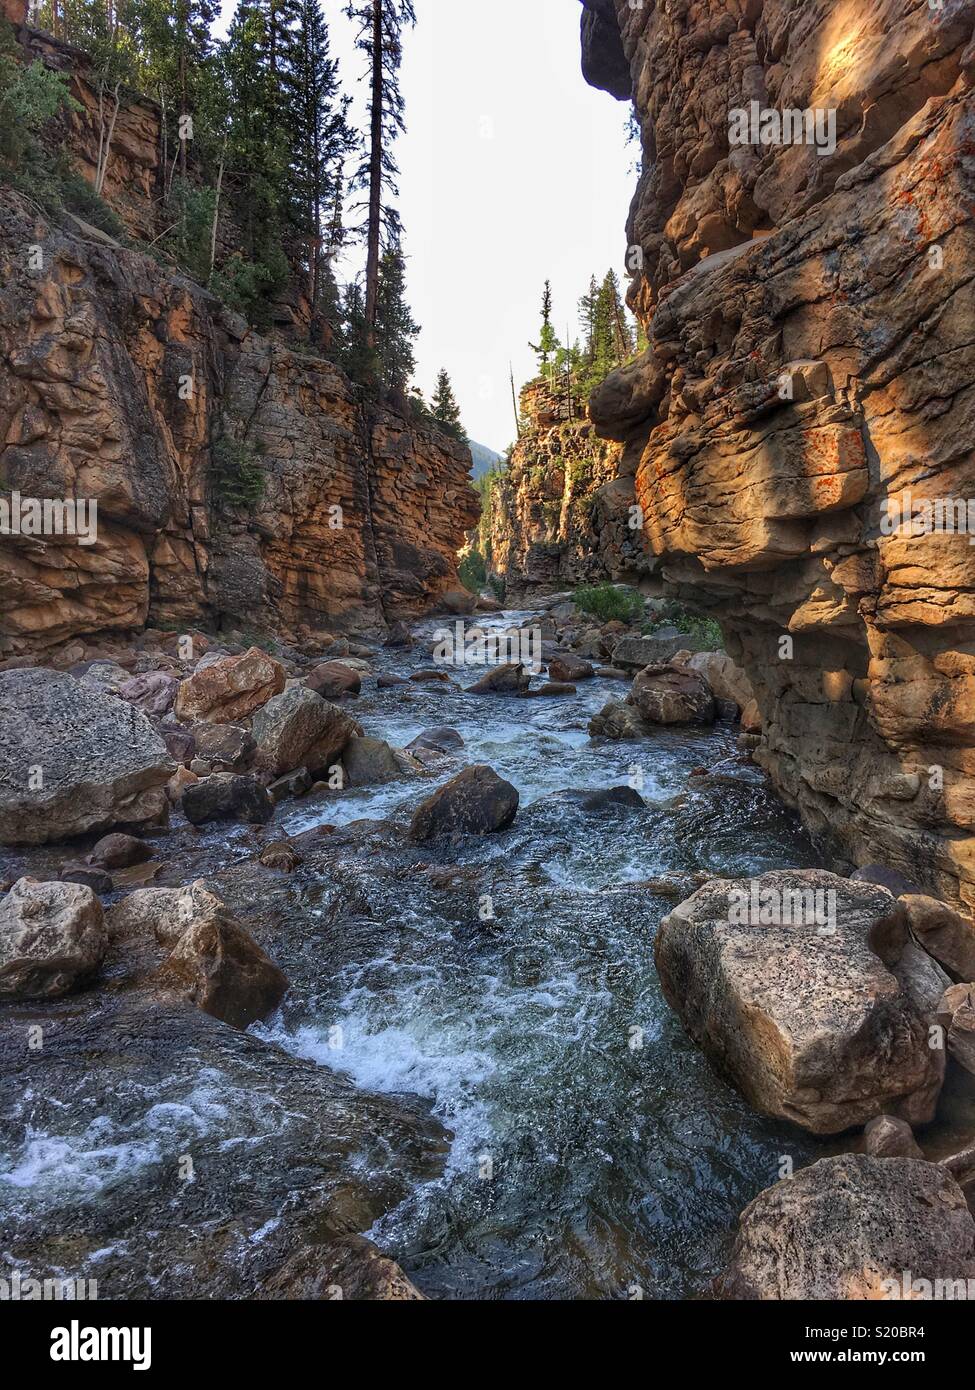 A river cuts through a gorge in the Uinta mountains of Utah. Stock Photo